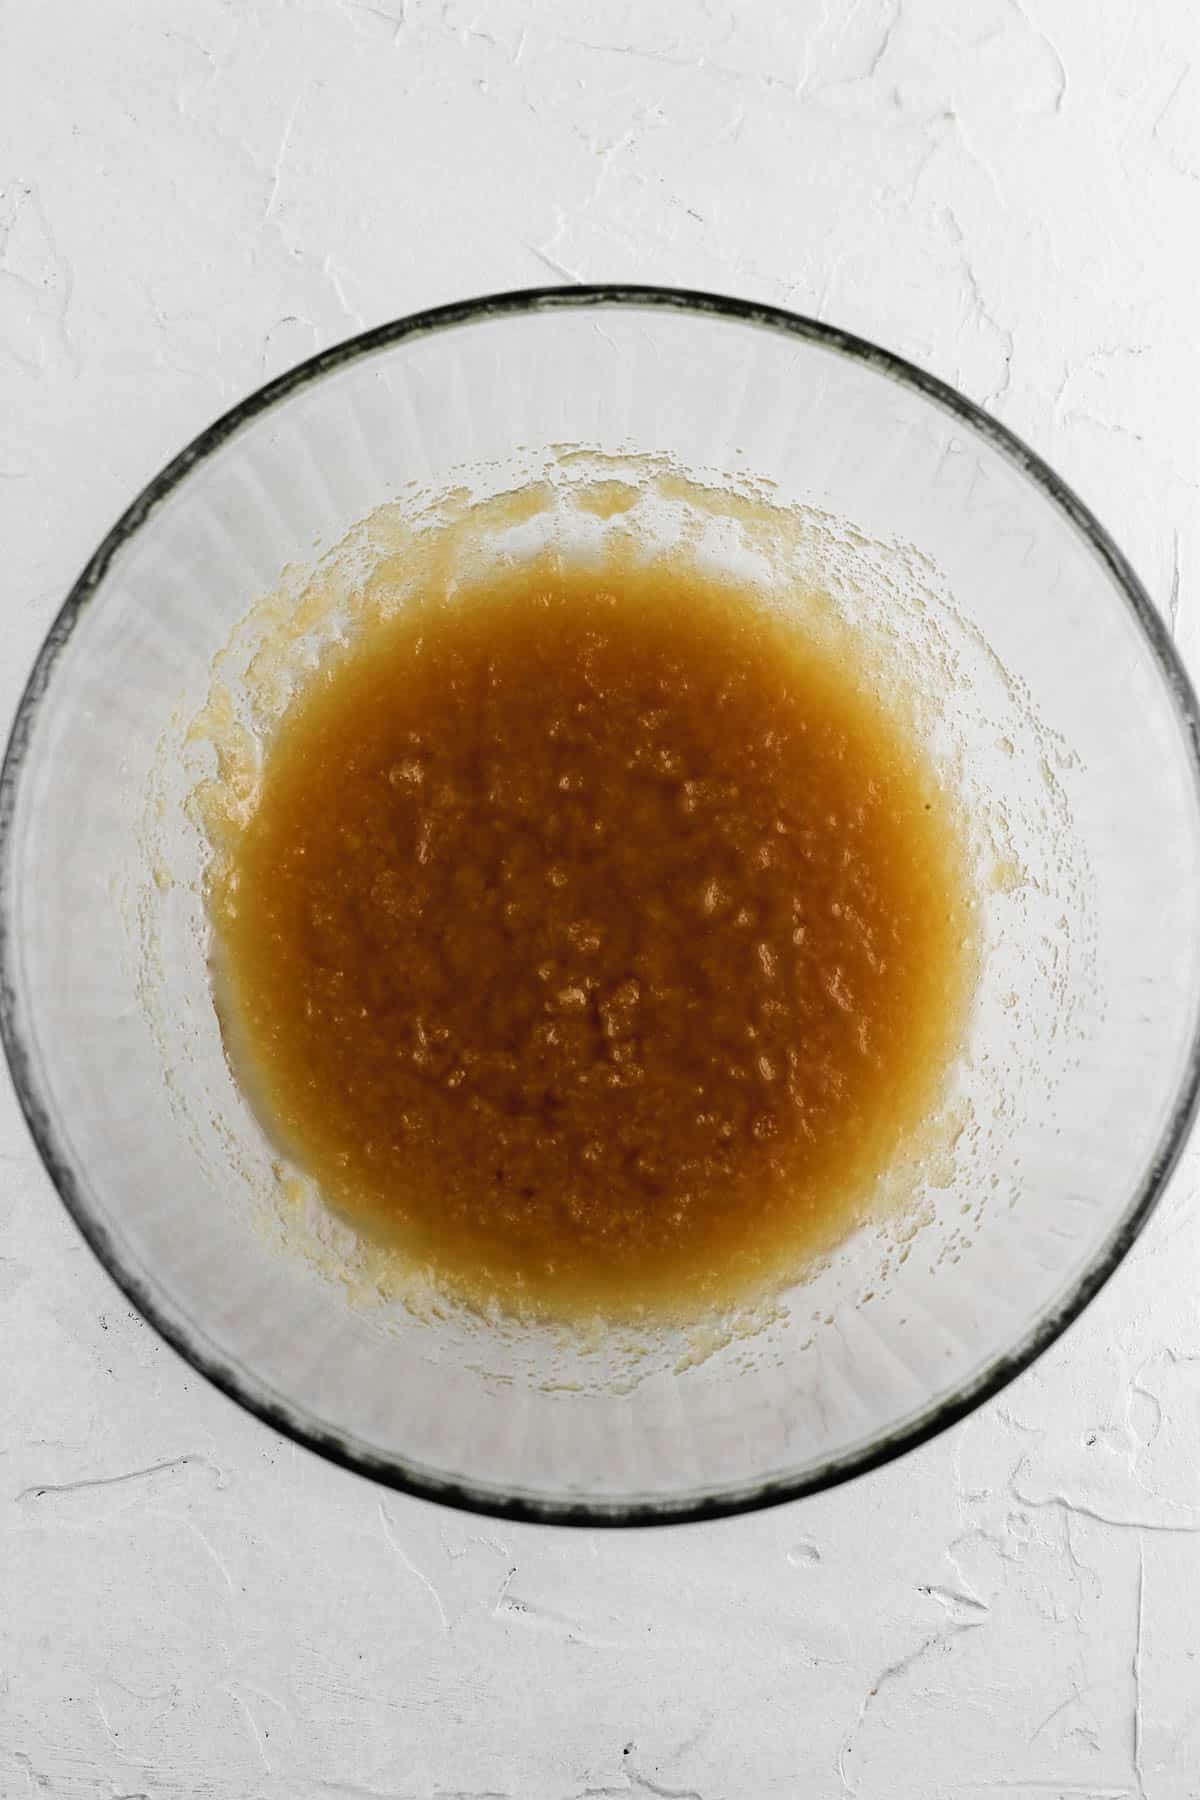 Melted butter, oil, and brown sugar combined in a glass mixing bowl.